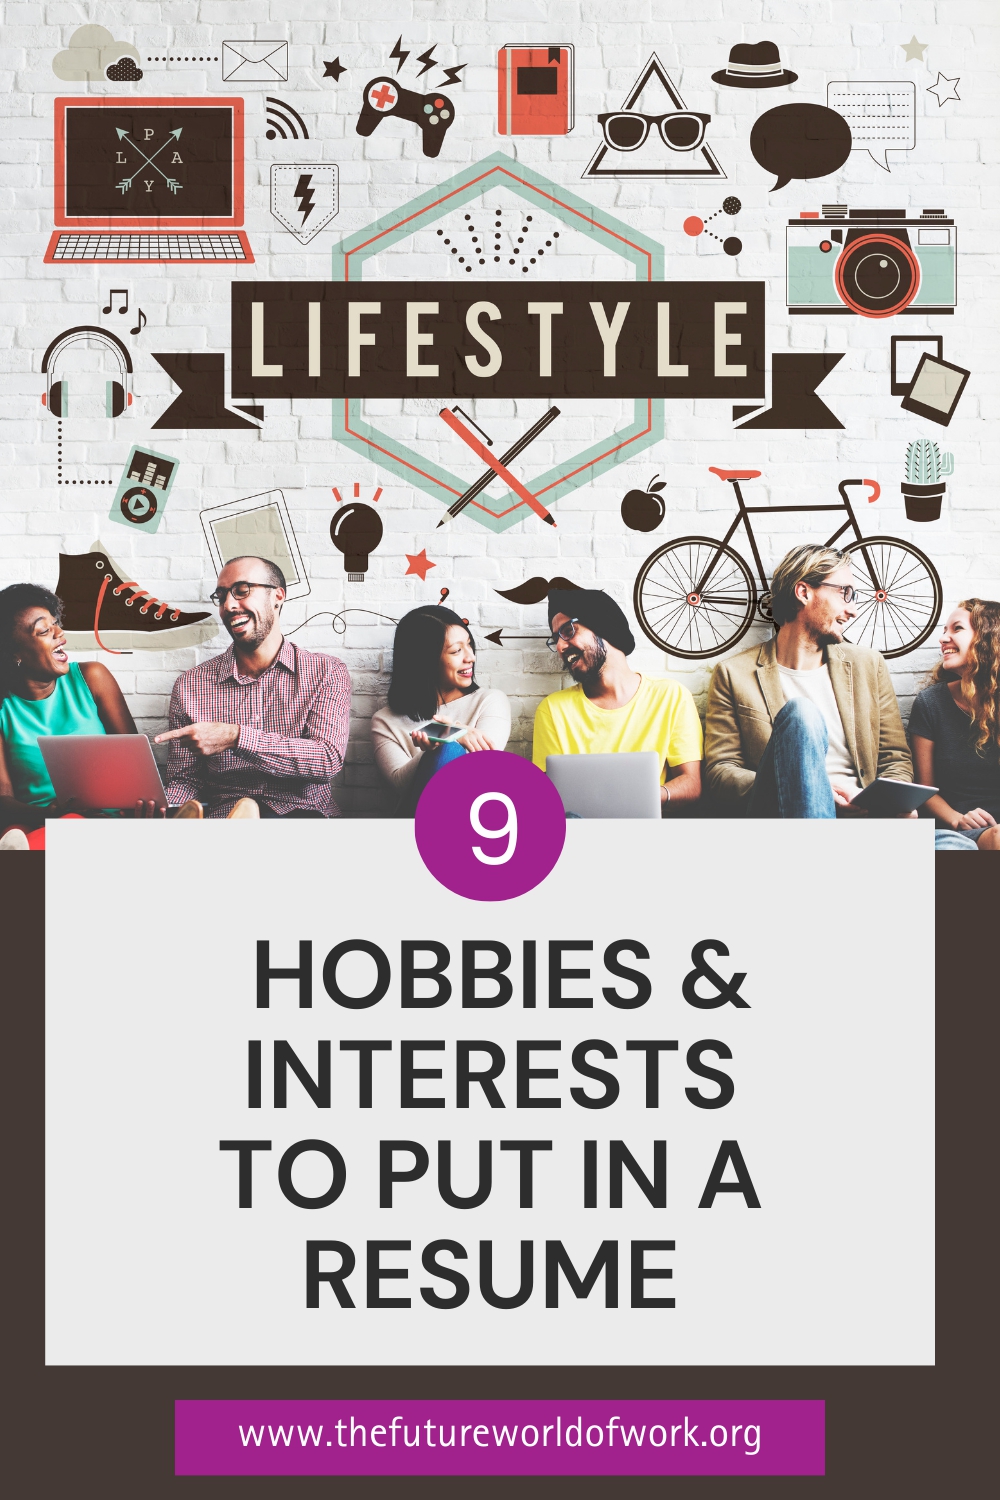 Hobbies & Interests to Put in a Resume